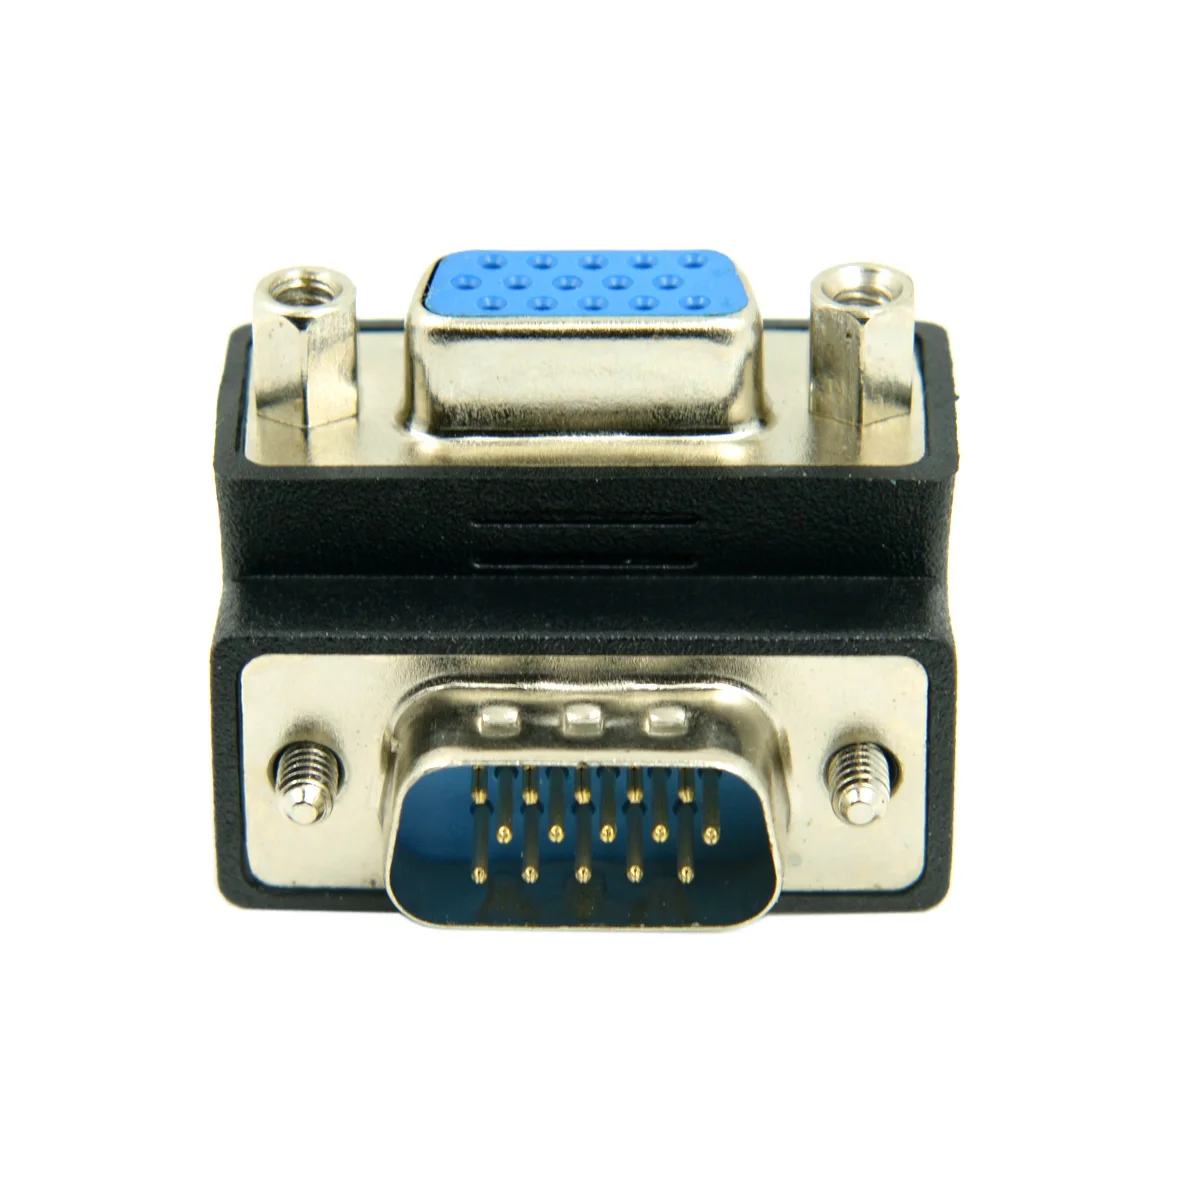 

Xiwai VGA SVGA Down Angled 15pin Socket Male To Plug Female High Density Extension Adapter Converter Changer Connector